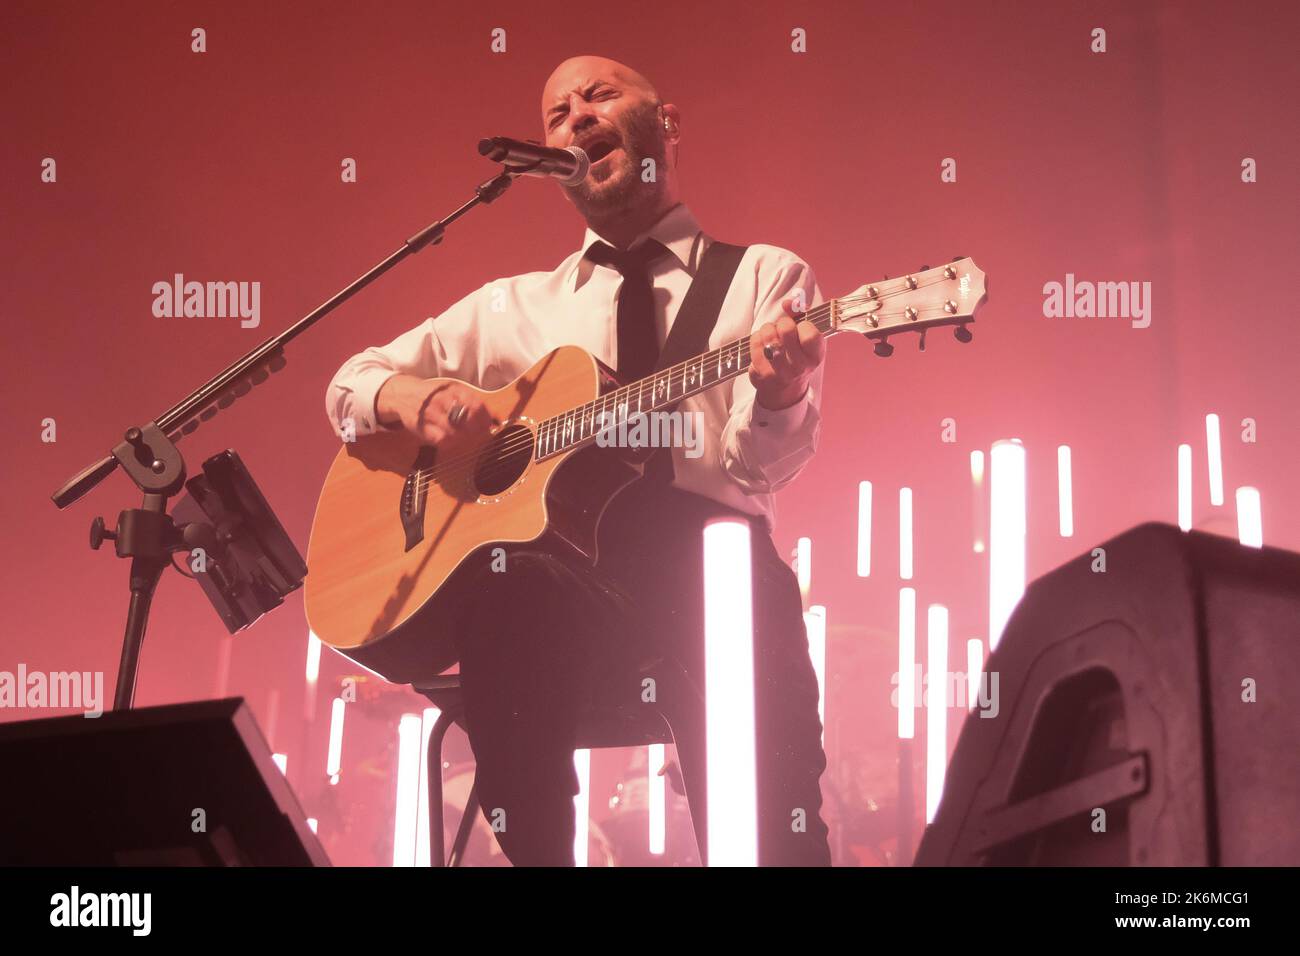 Brixia, Italy. 14th October 2022. The Italian band of Negramaro during their live performs at Gran Teatro Morato for their Unplugged European Tour 2022 Credit: Roberto Tommasini/Alamy Live News Stock Photo